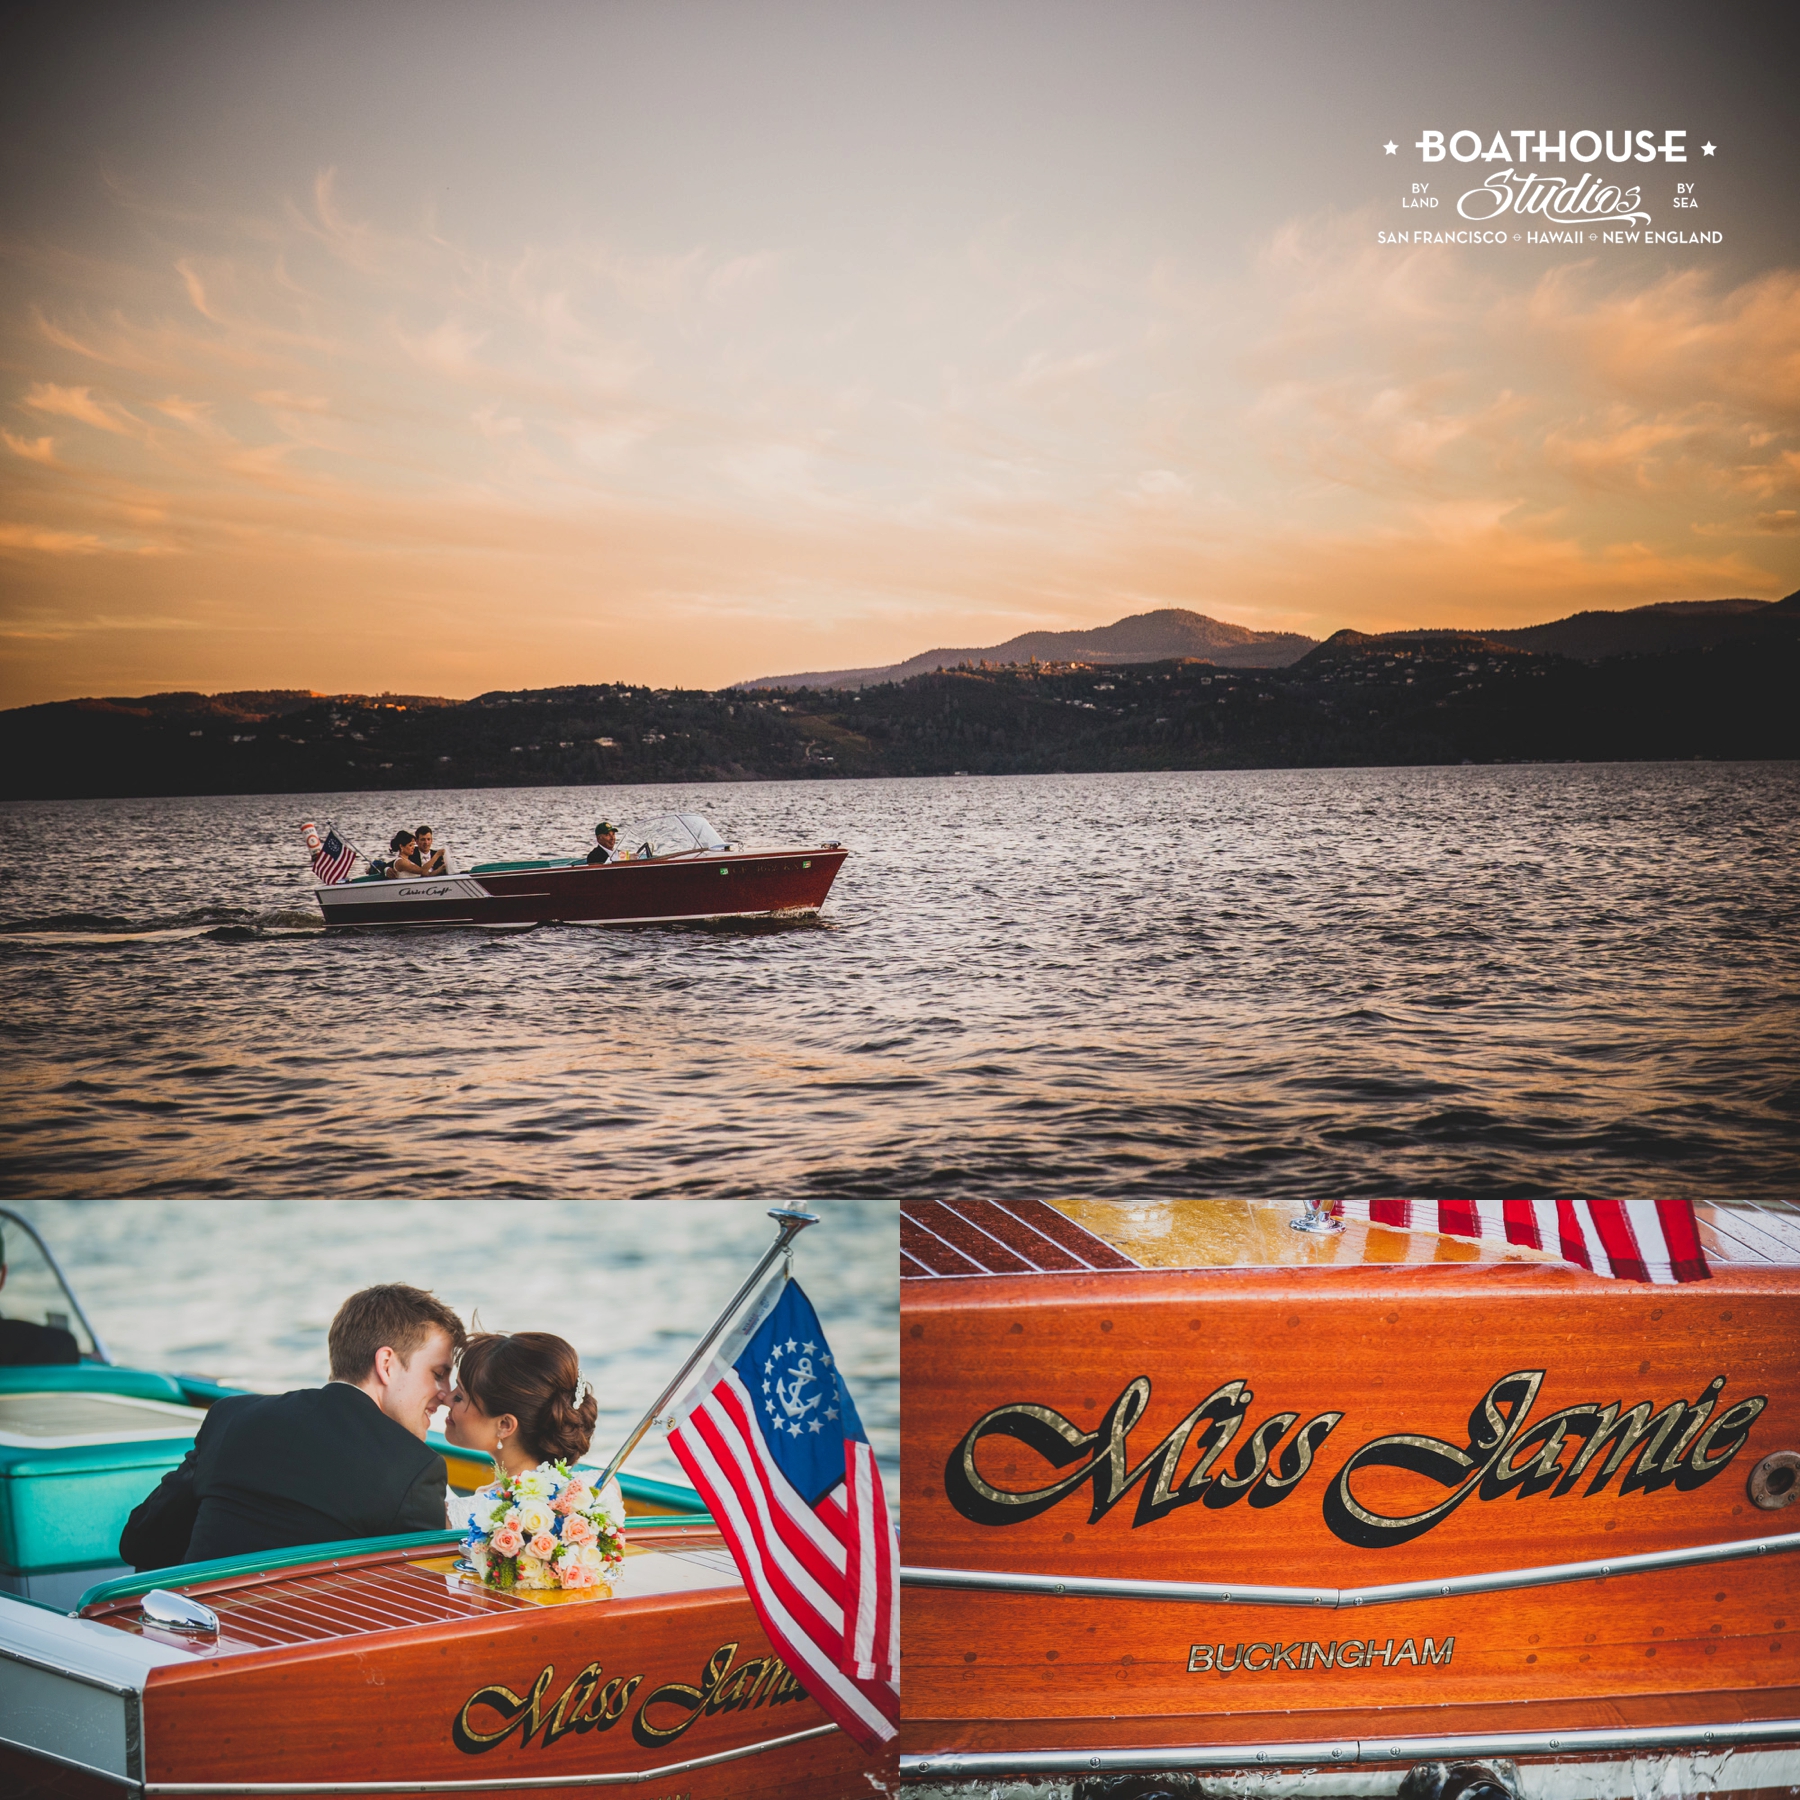 The antique Chris Craft just happened to share it's name with the bride. Beautiful sunset on Clearlake.